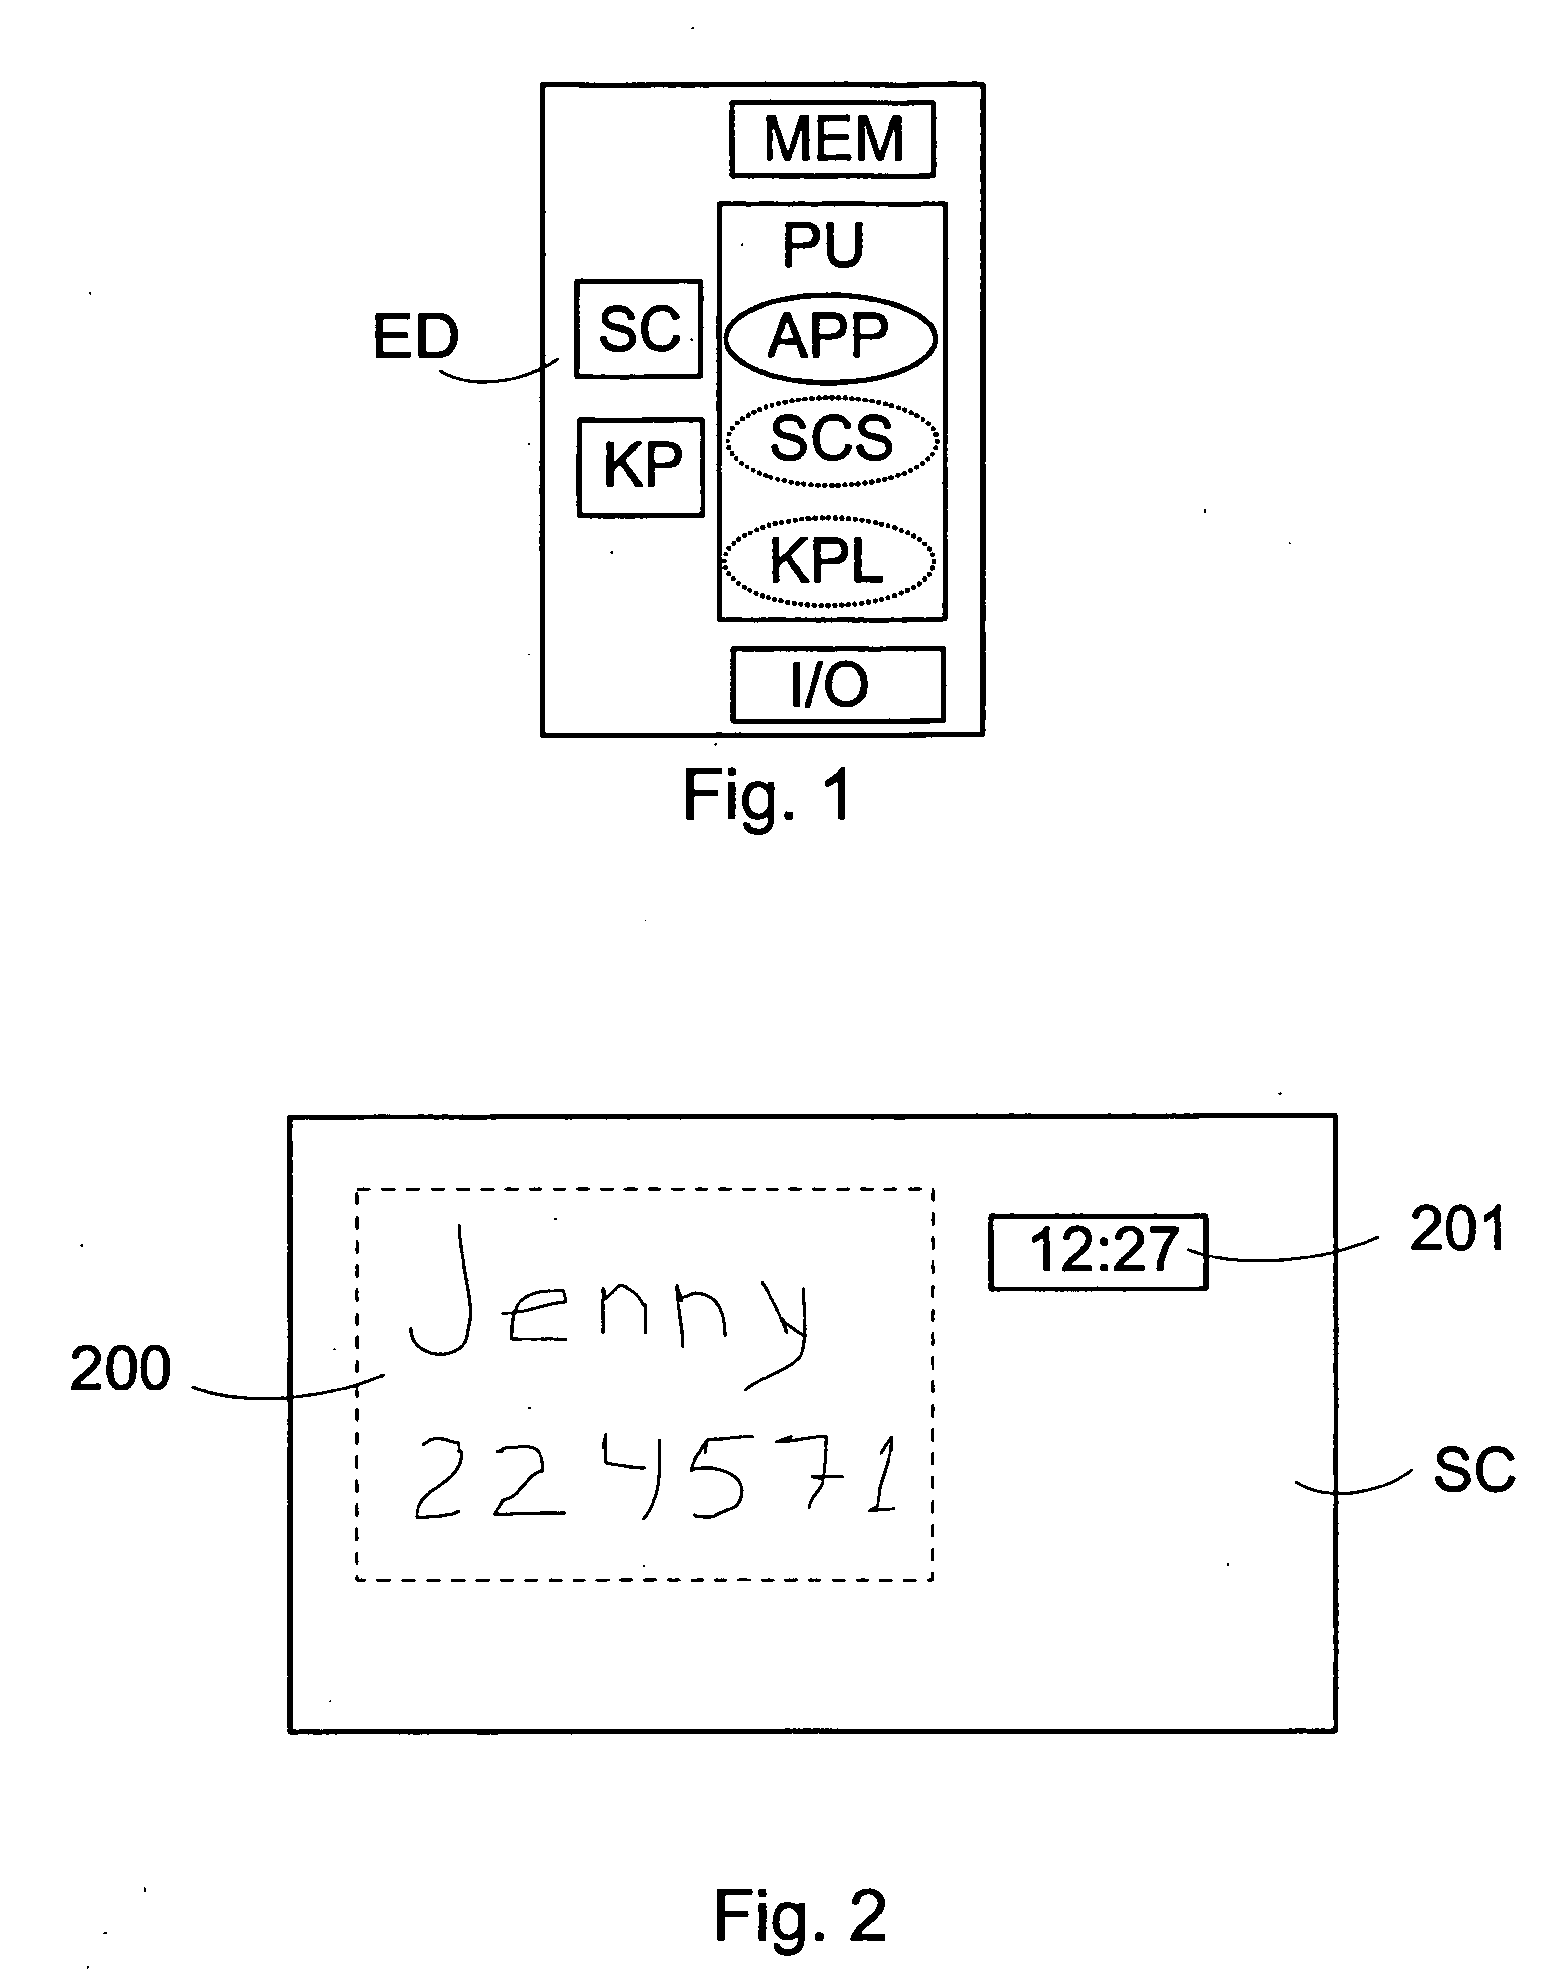 Method for receiving inputs from user of electronic device